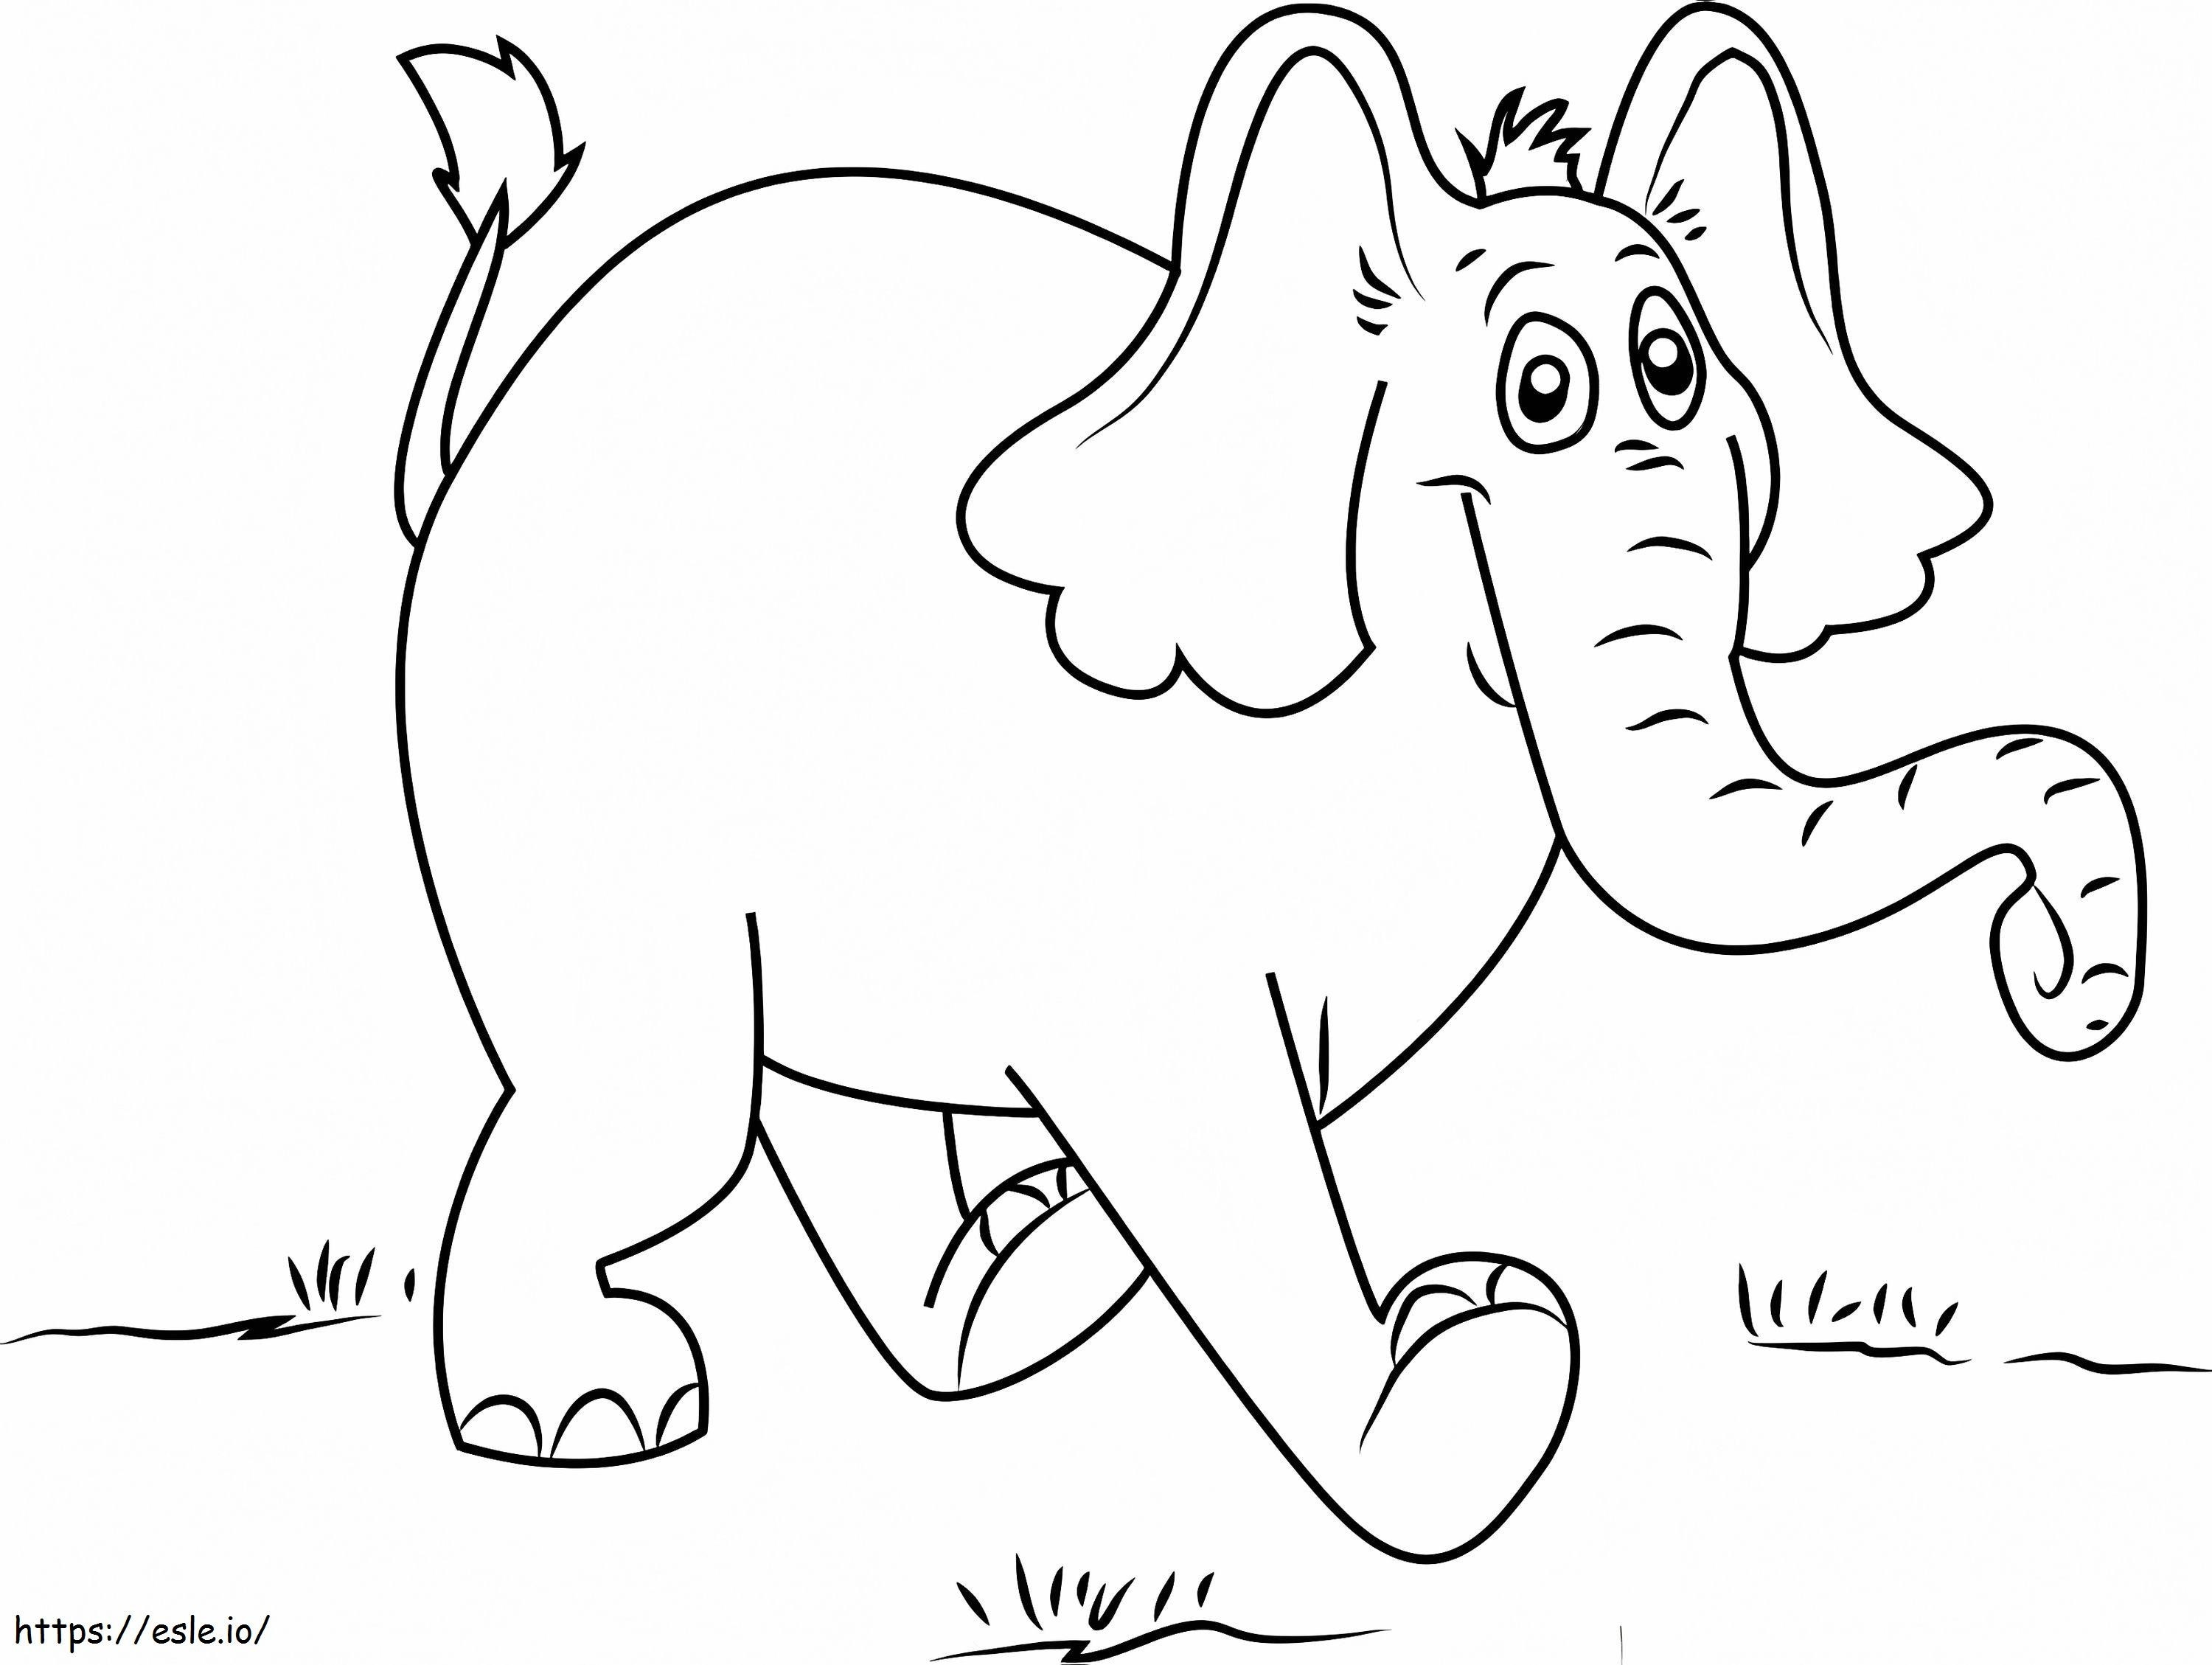 Cute Horton The Elephant coloring page